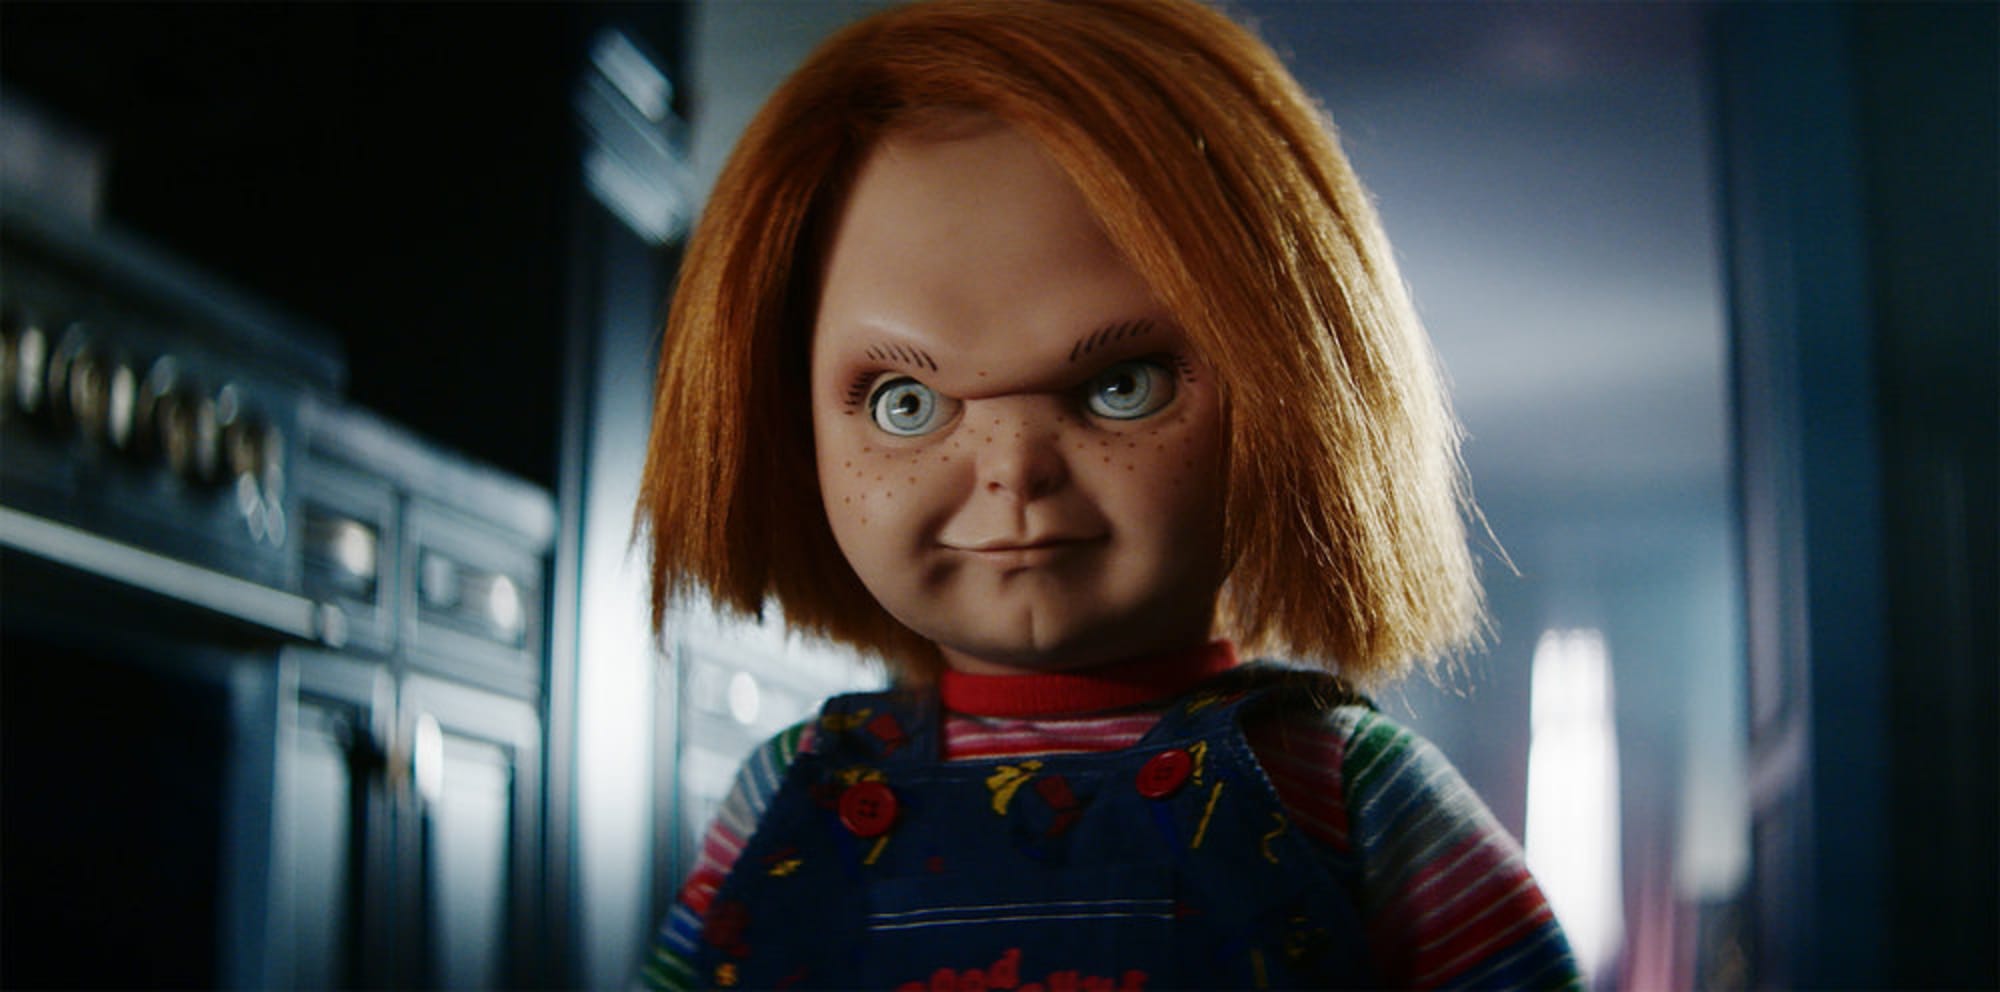 Chucky movies in order: How to watch the Child's Play series